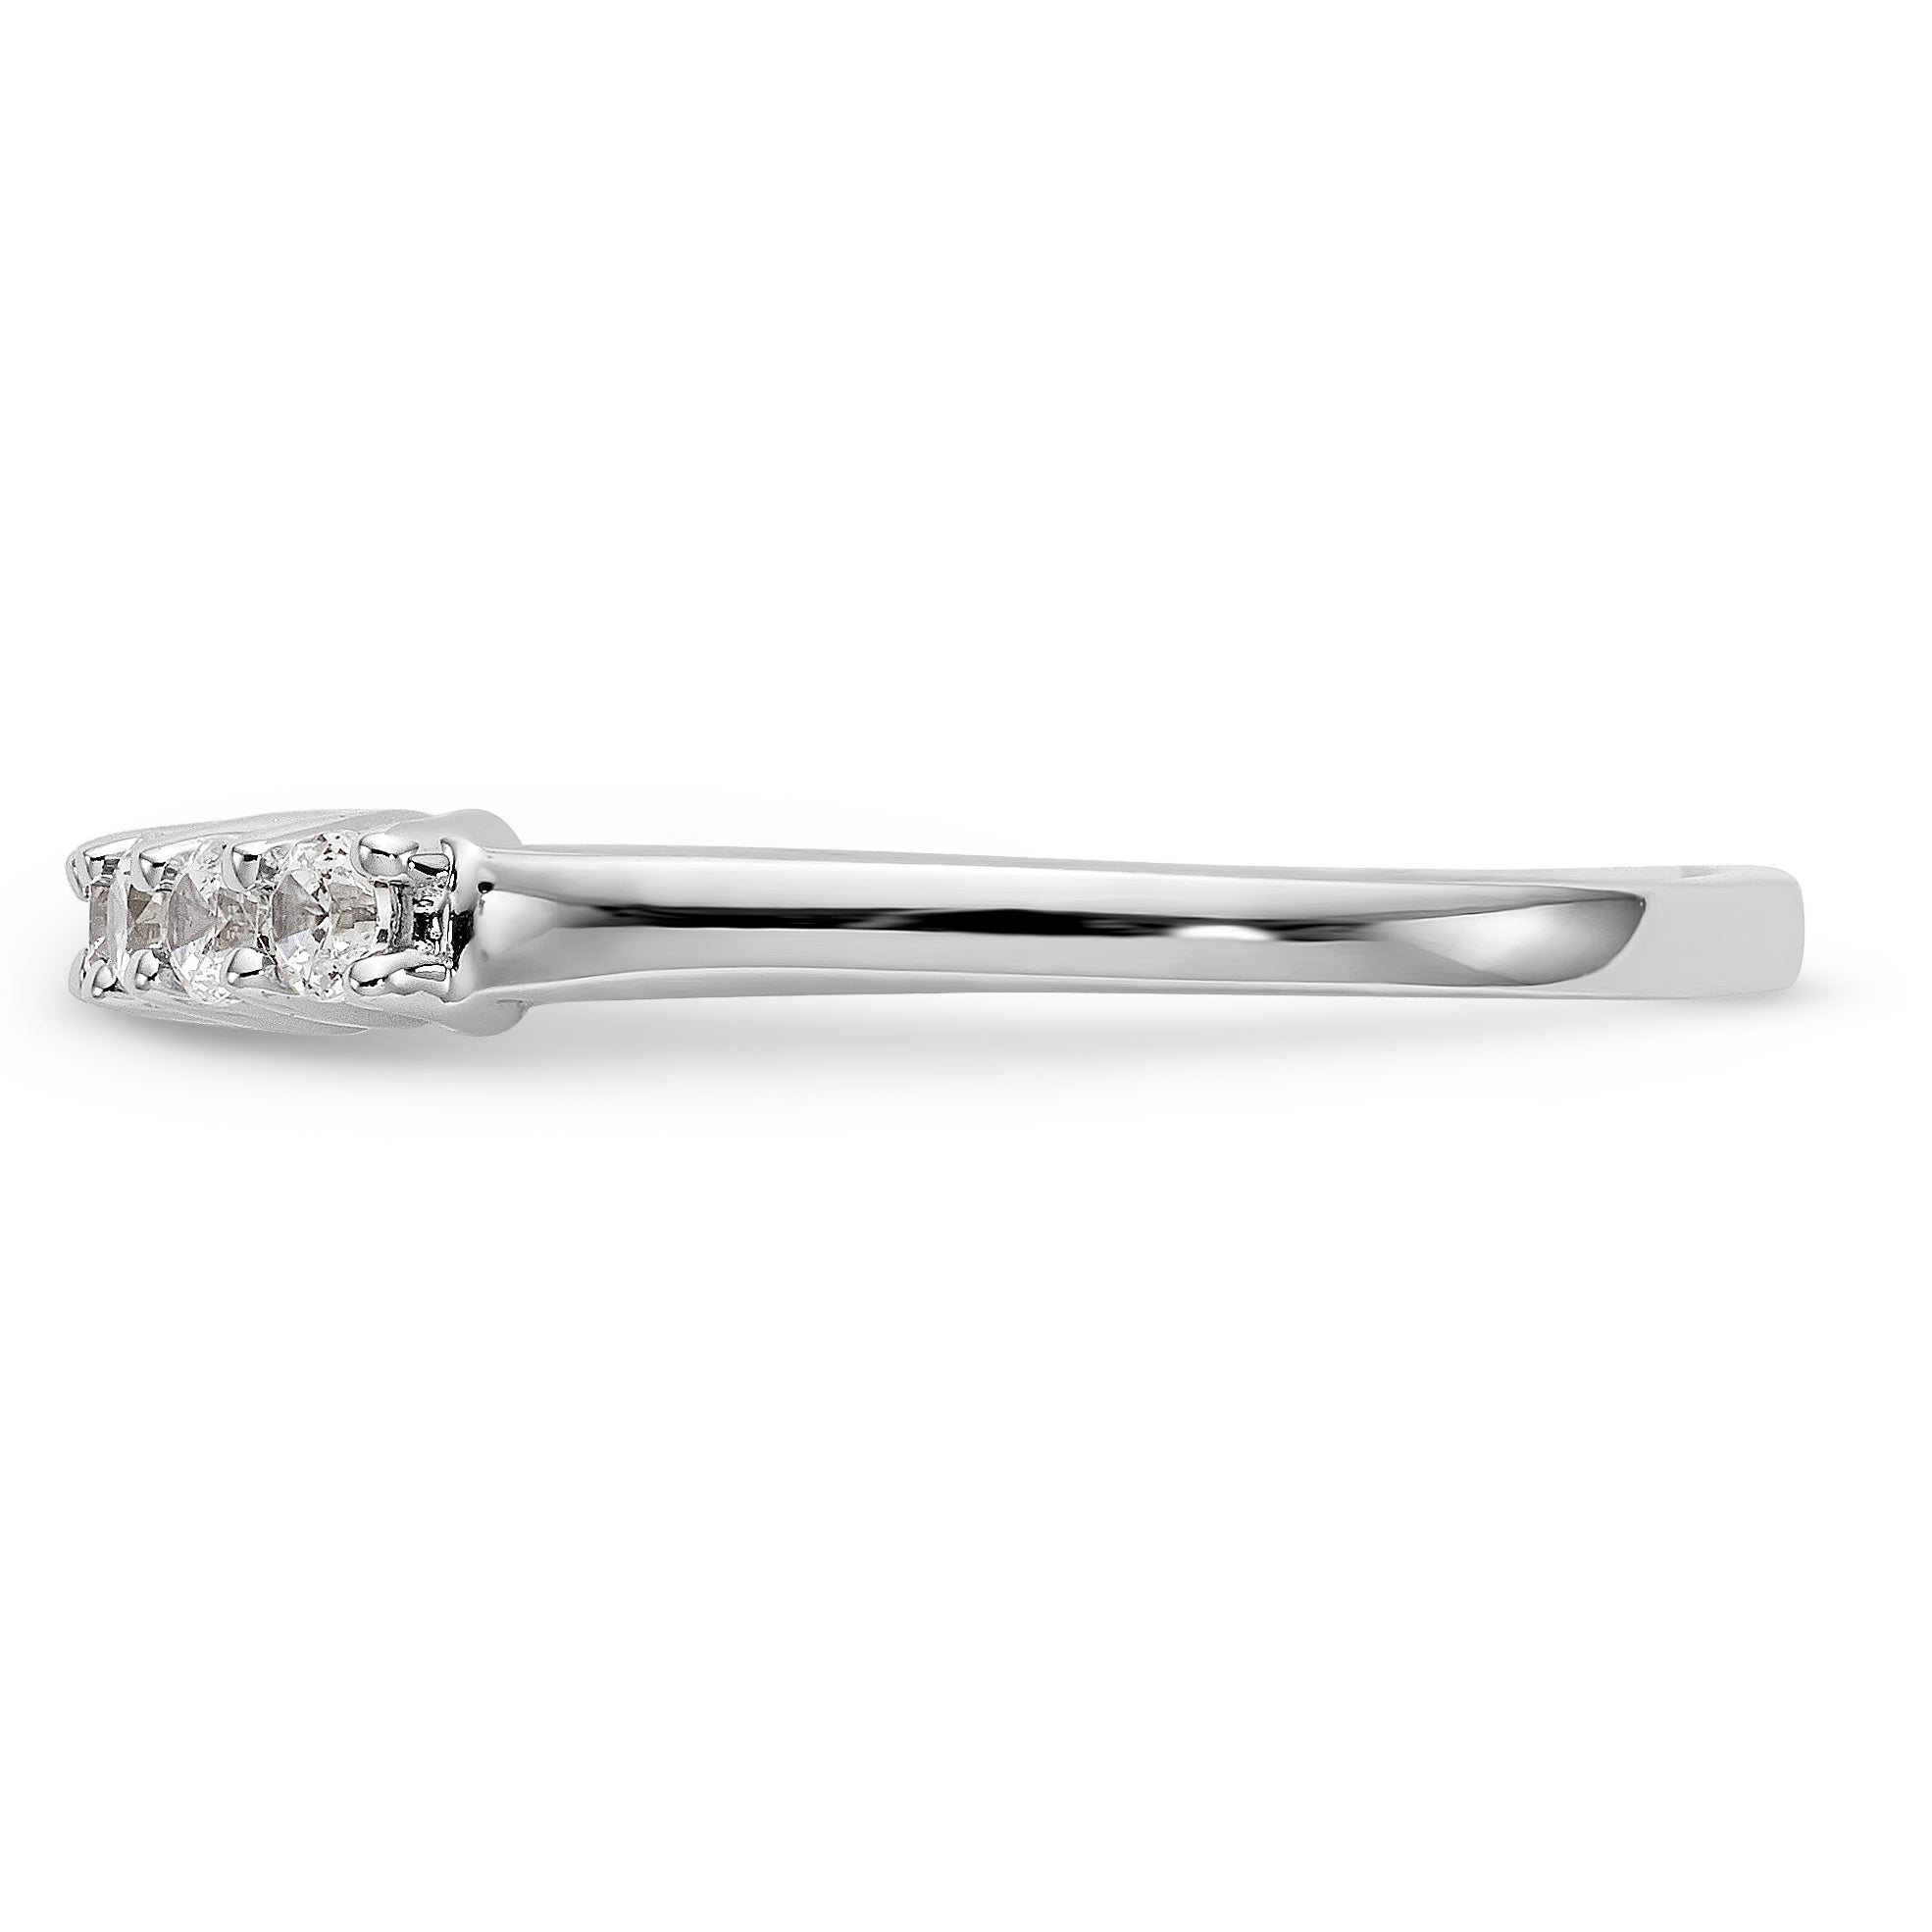 14K White Gold 7-Stone Shared Prong 1/3 carat Complete Round Diamond Band